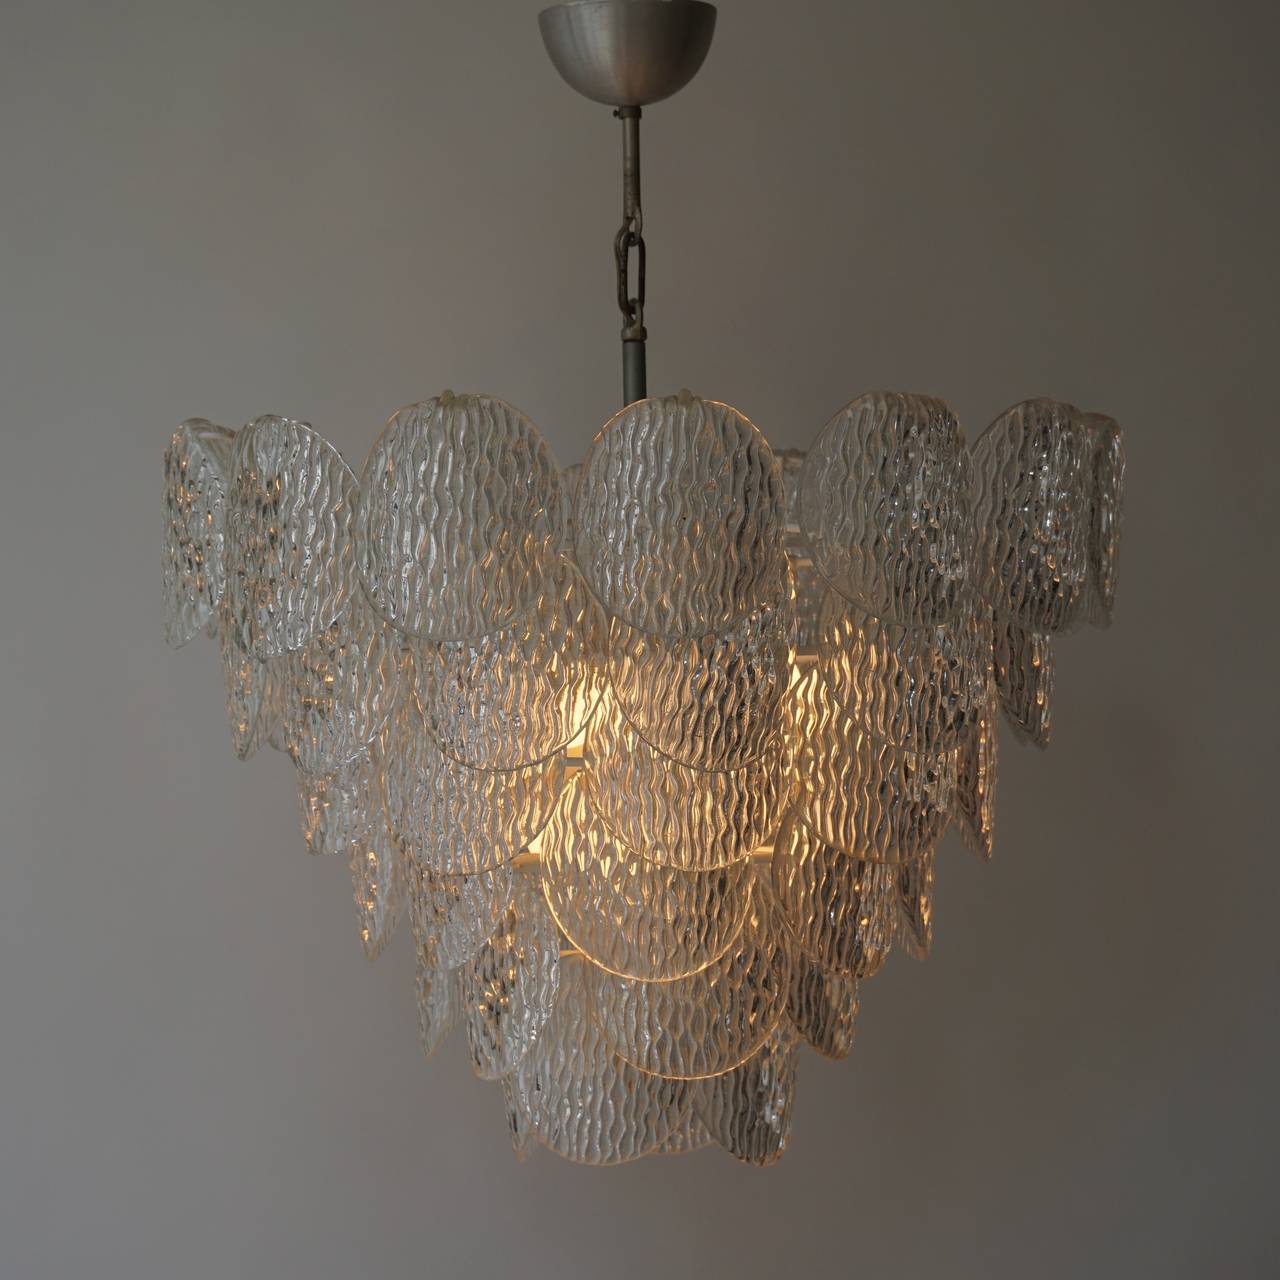 Italian Murano chandelier.
Total height with chain 66 cm.